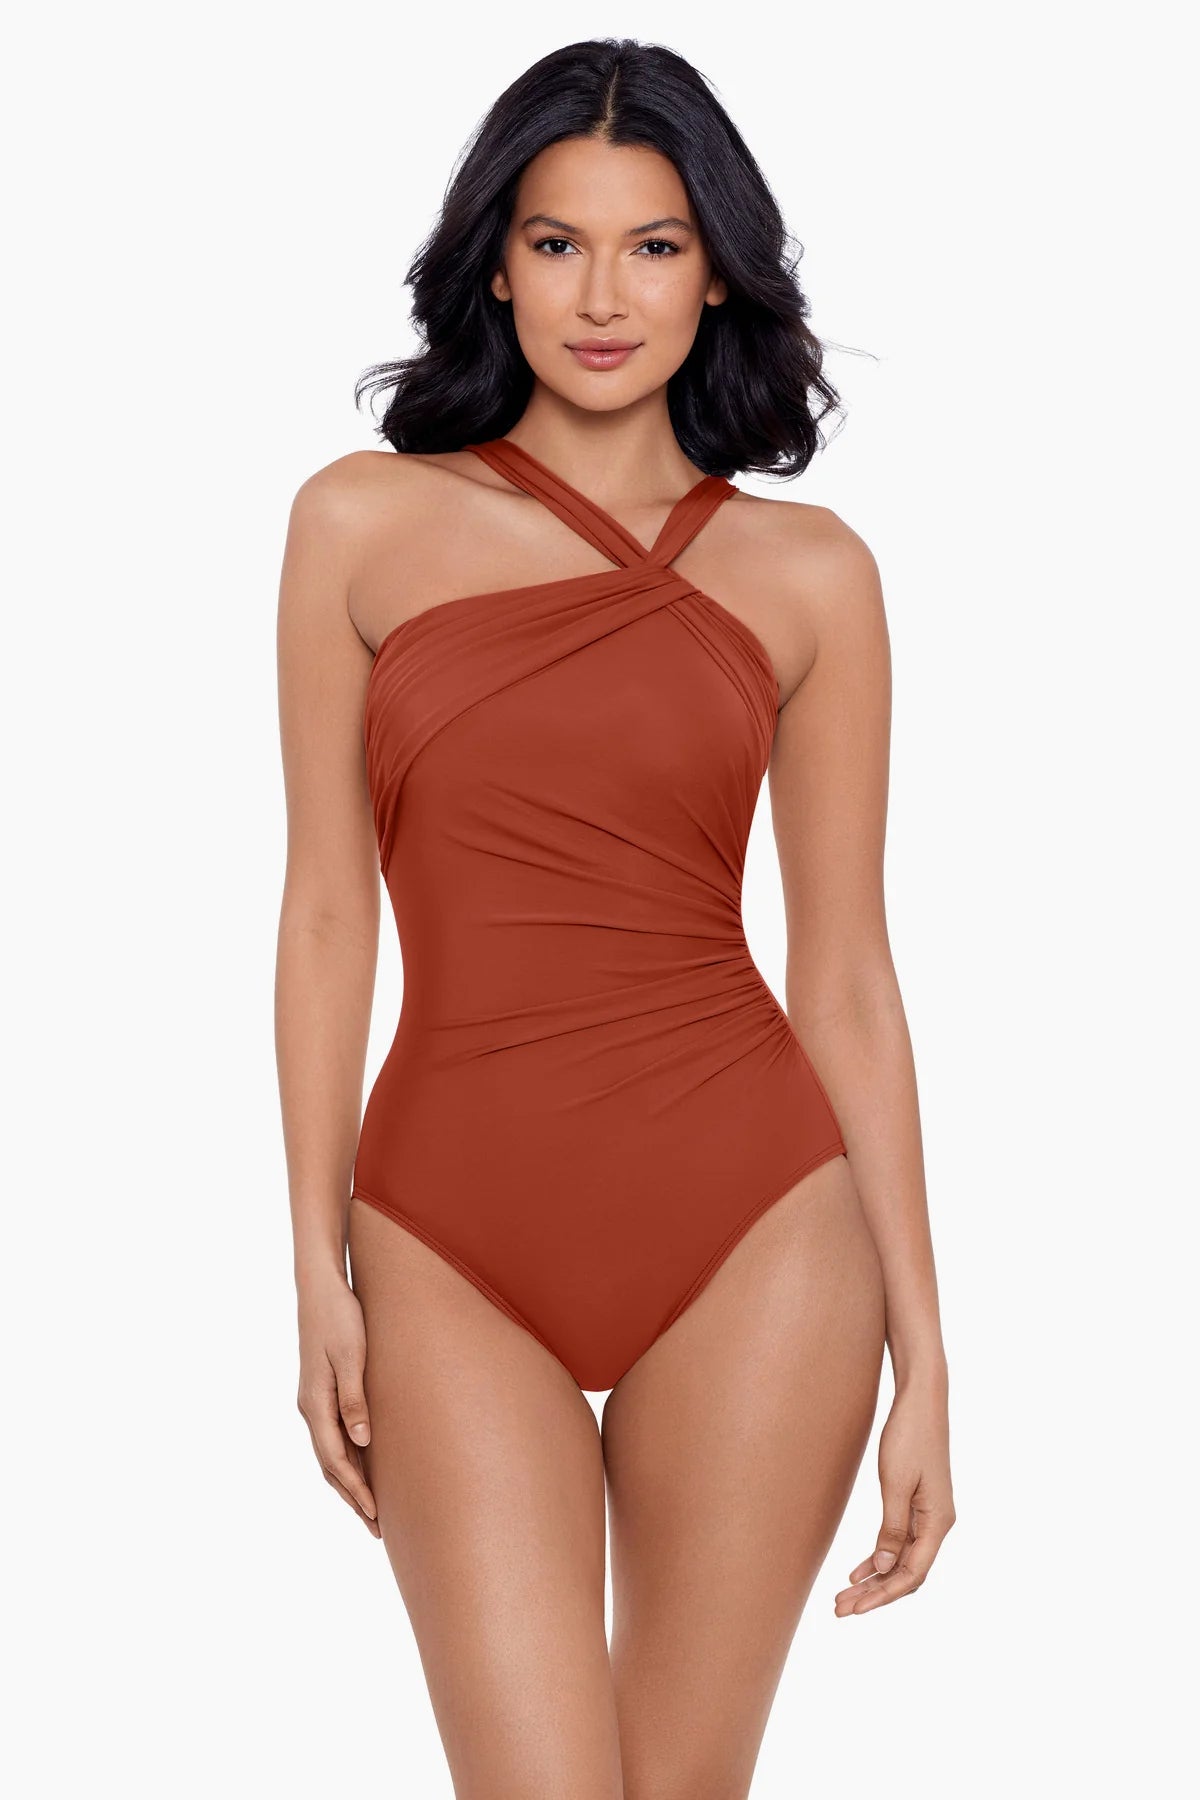 MiracleSuit Ocean Ombre Love Knot Tankini – Vicanie's